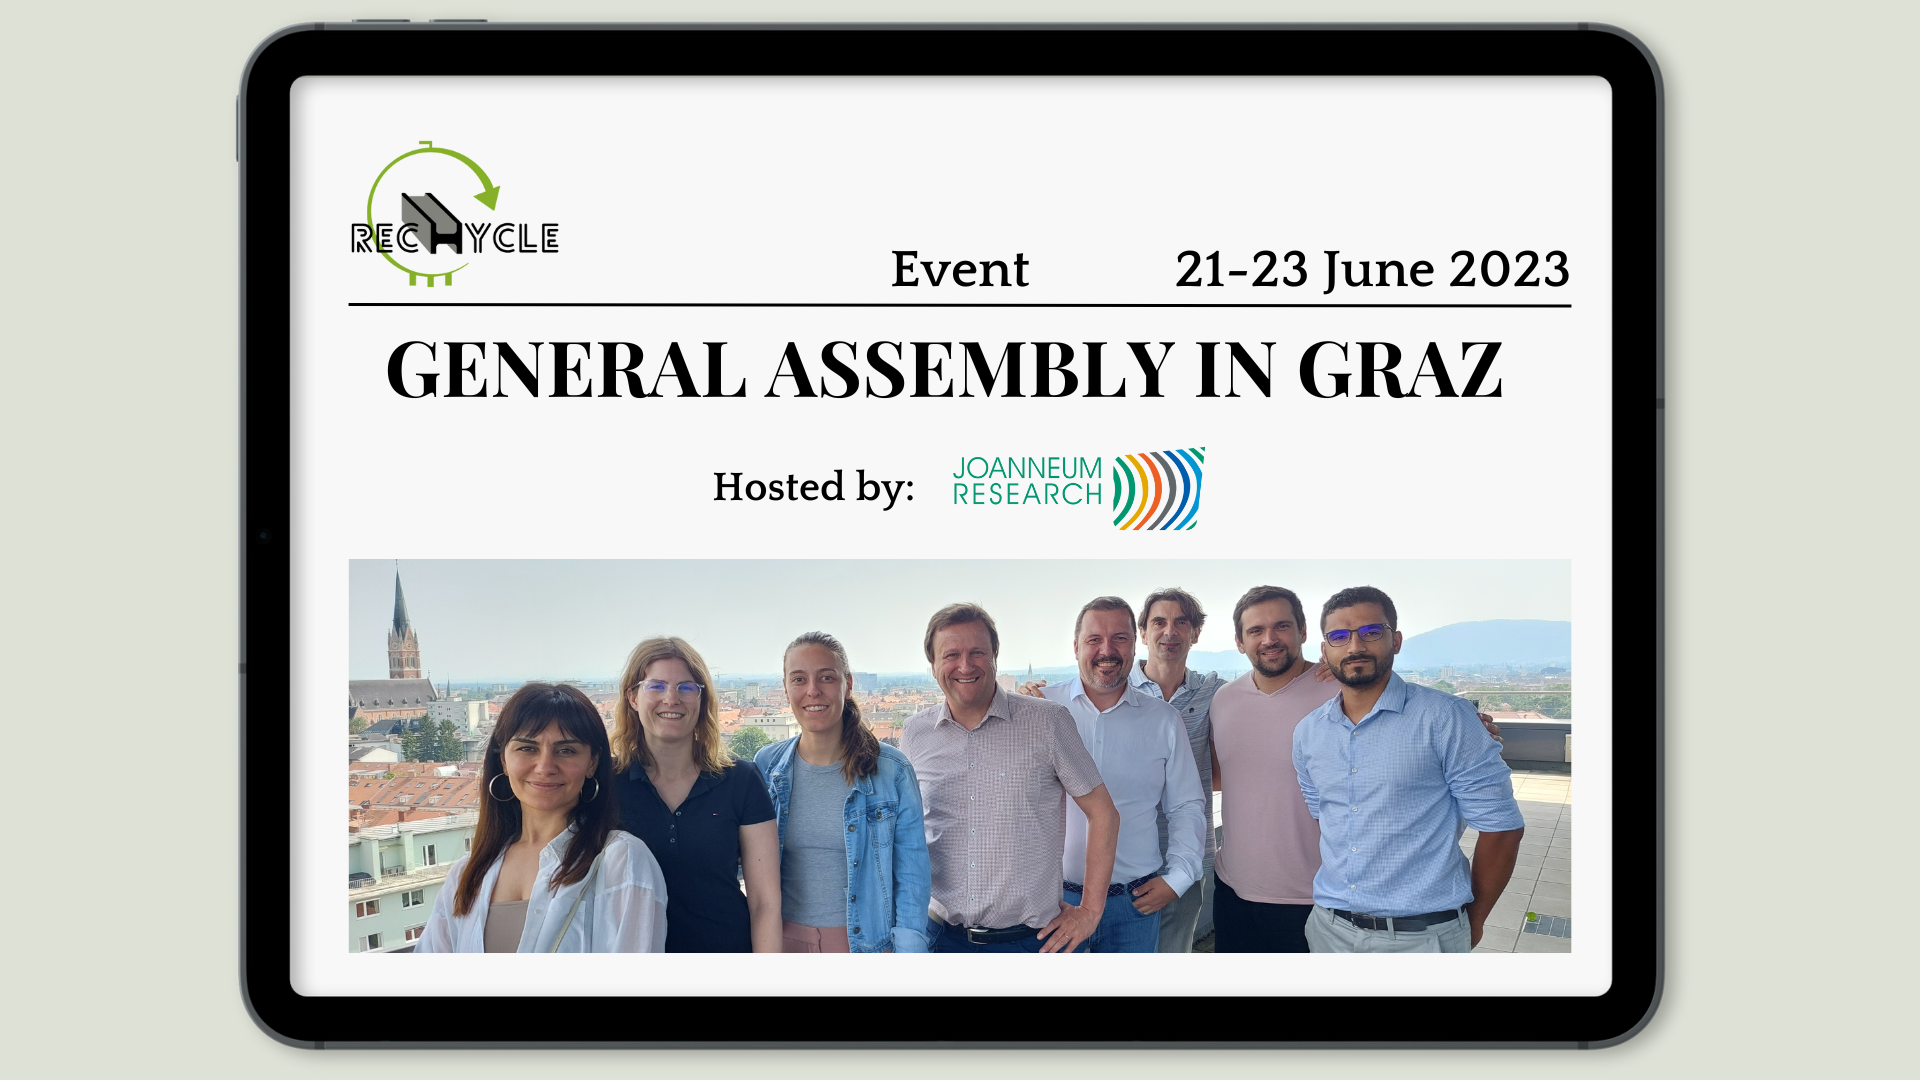 Joanneum Research Hosts RecHycle General Assembly in Graz